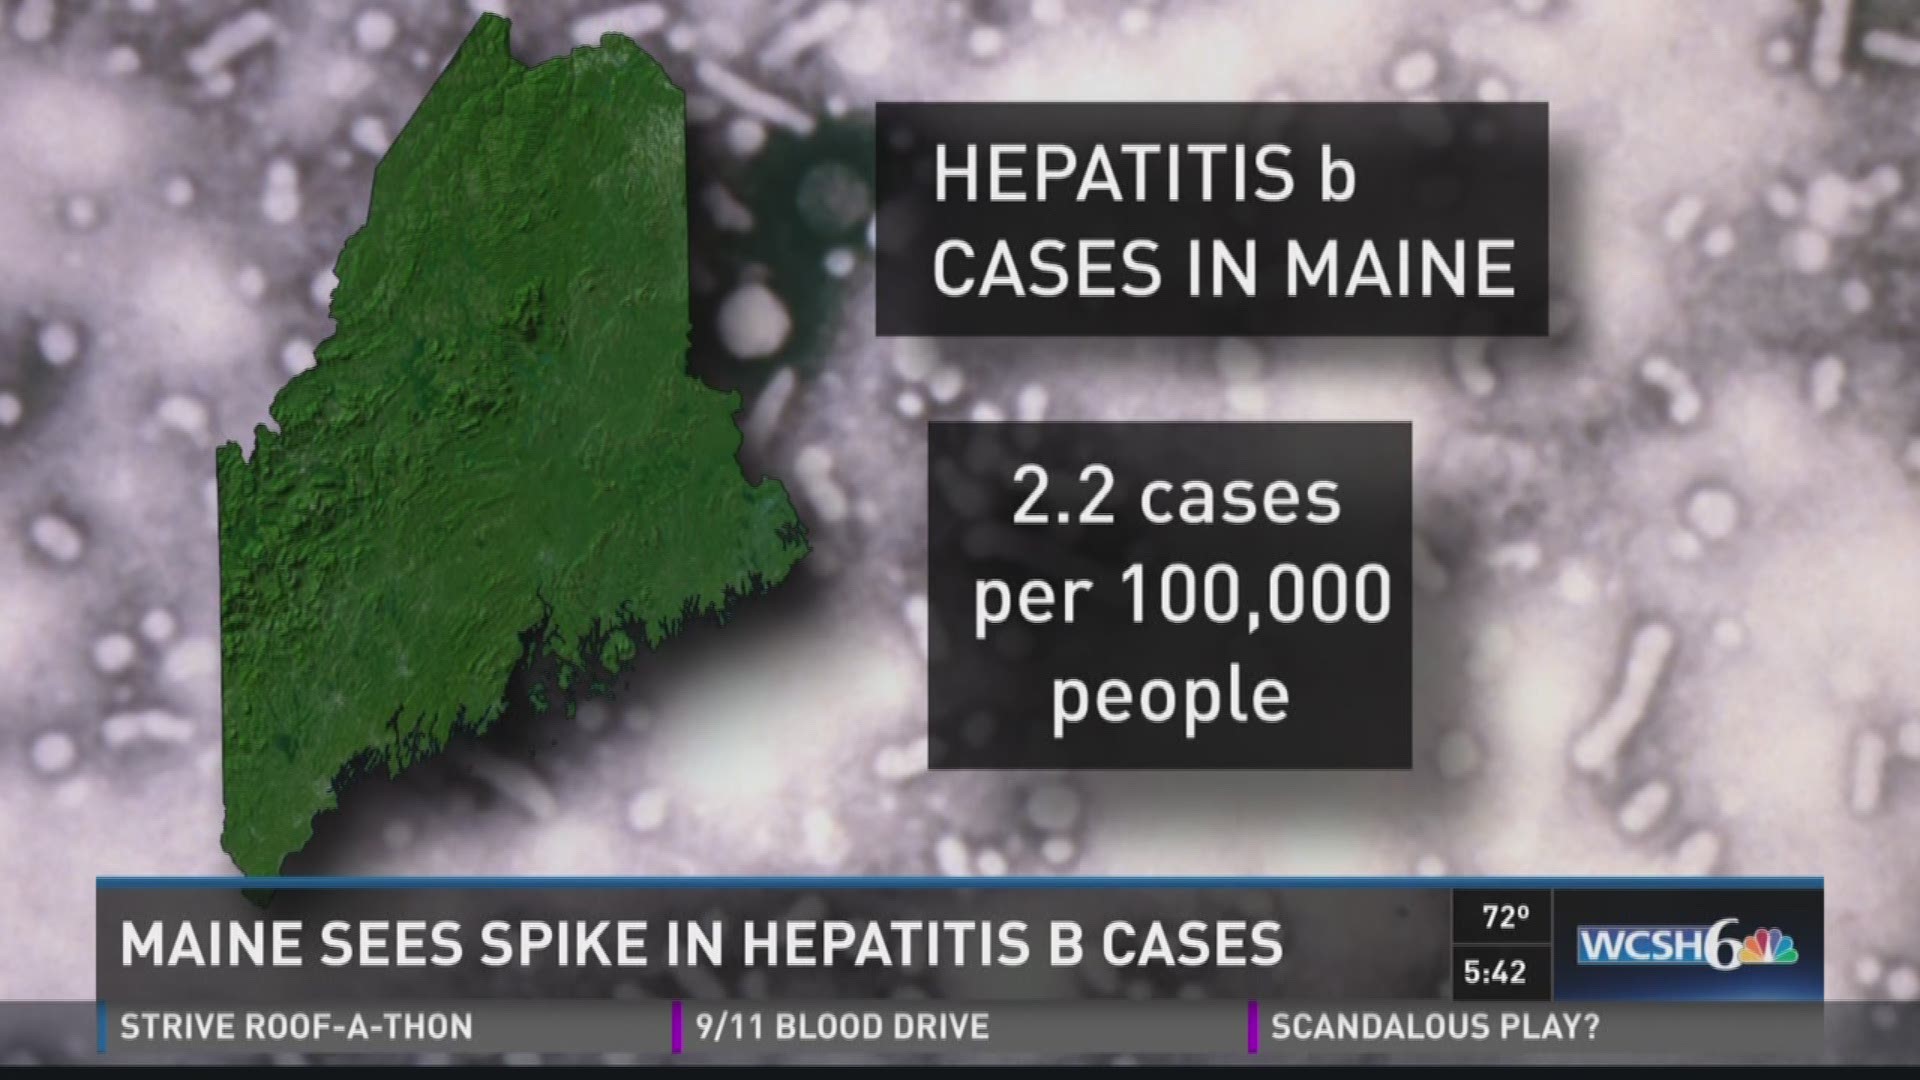 Maine sees Hep. B spike along with opiod crisis